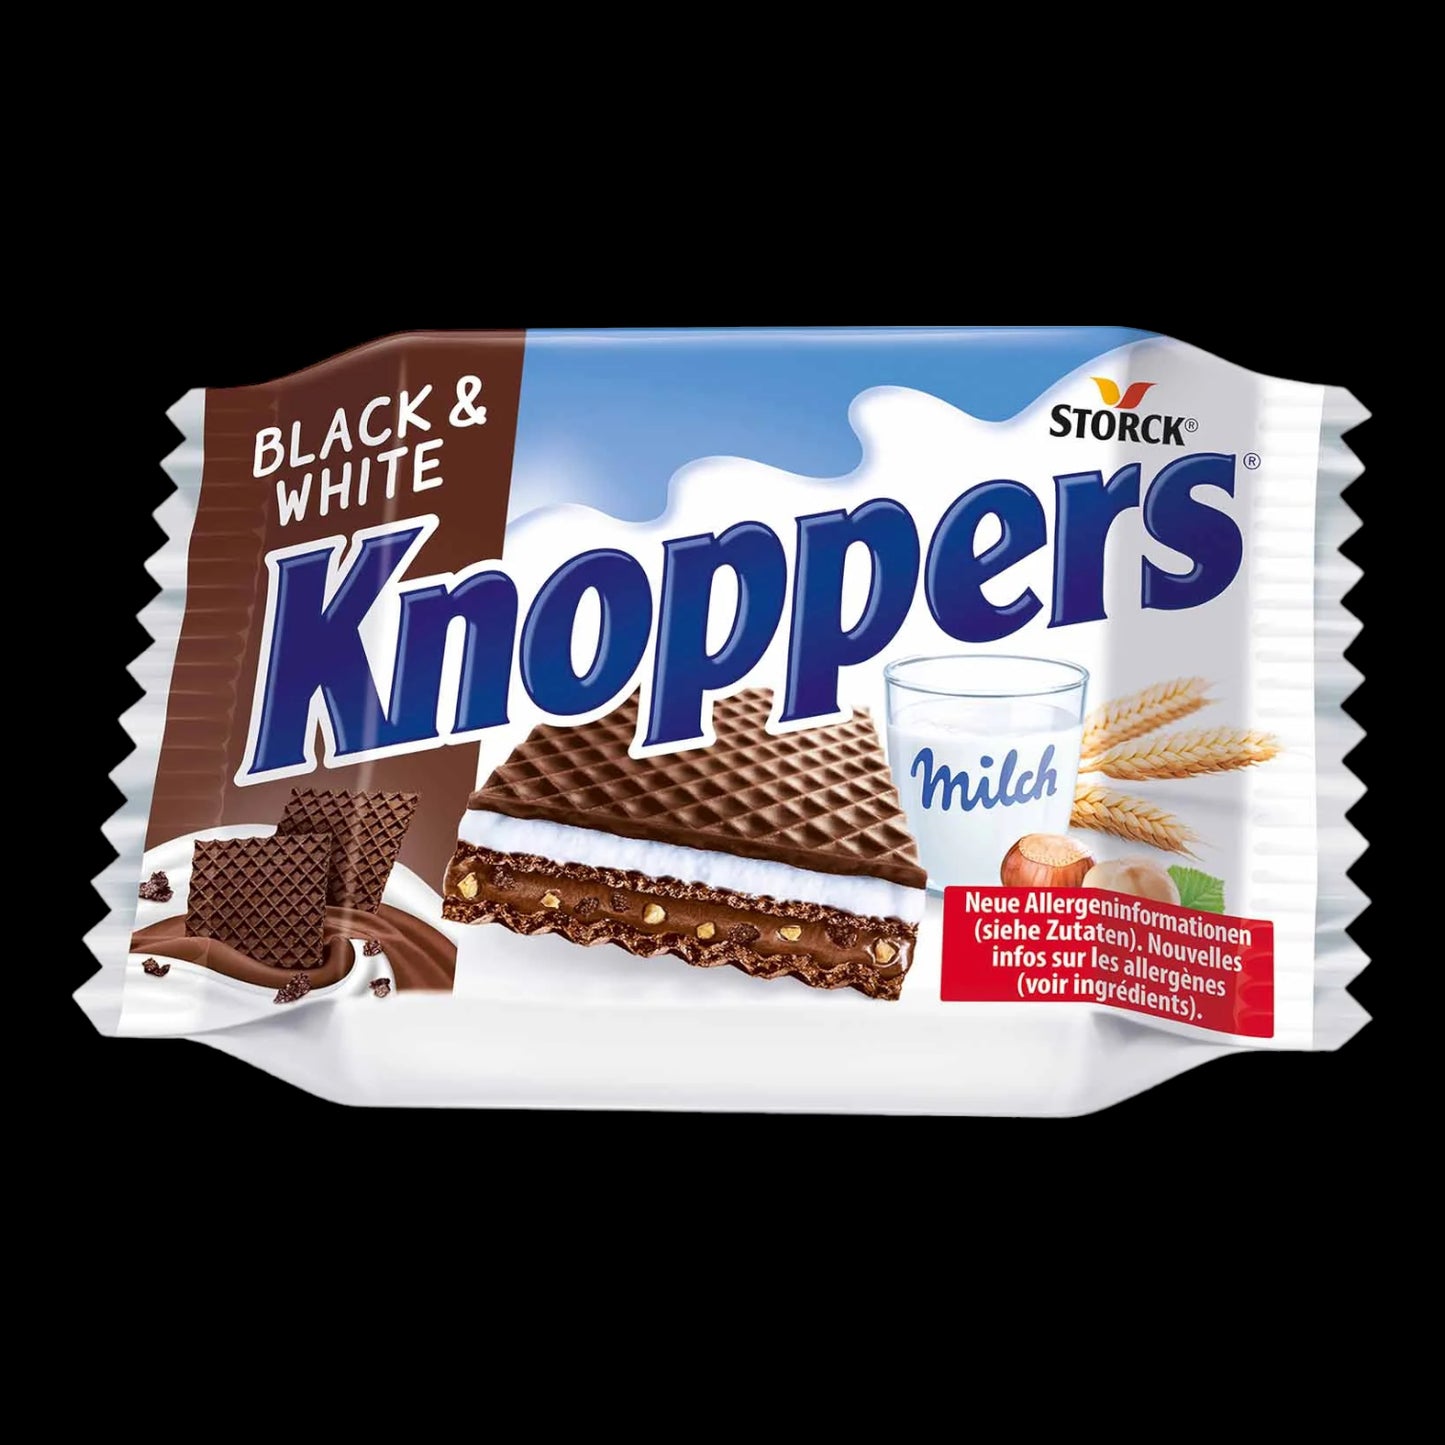 Knoppers Black & White 25g